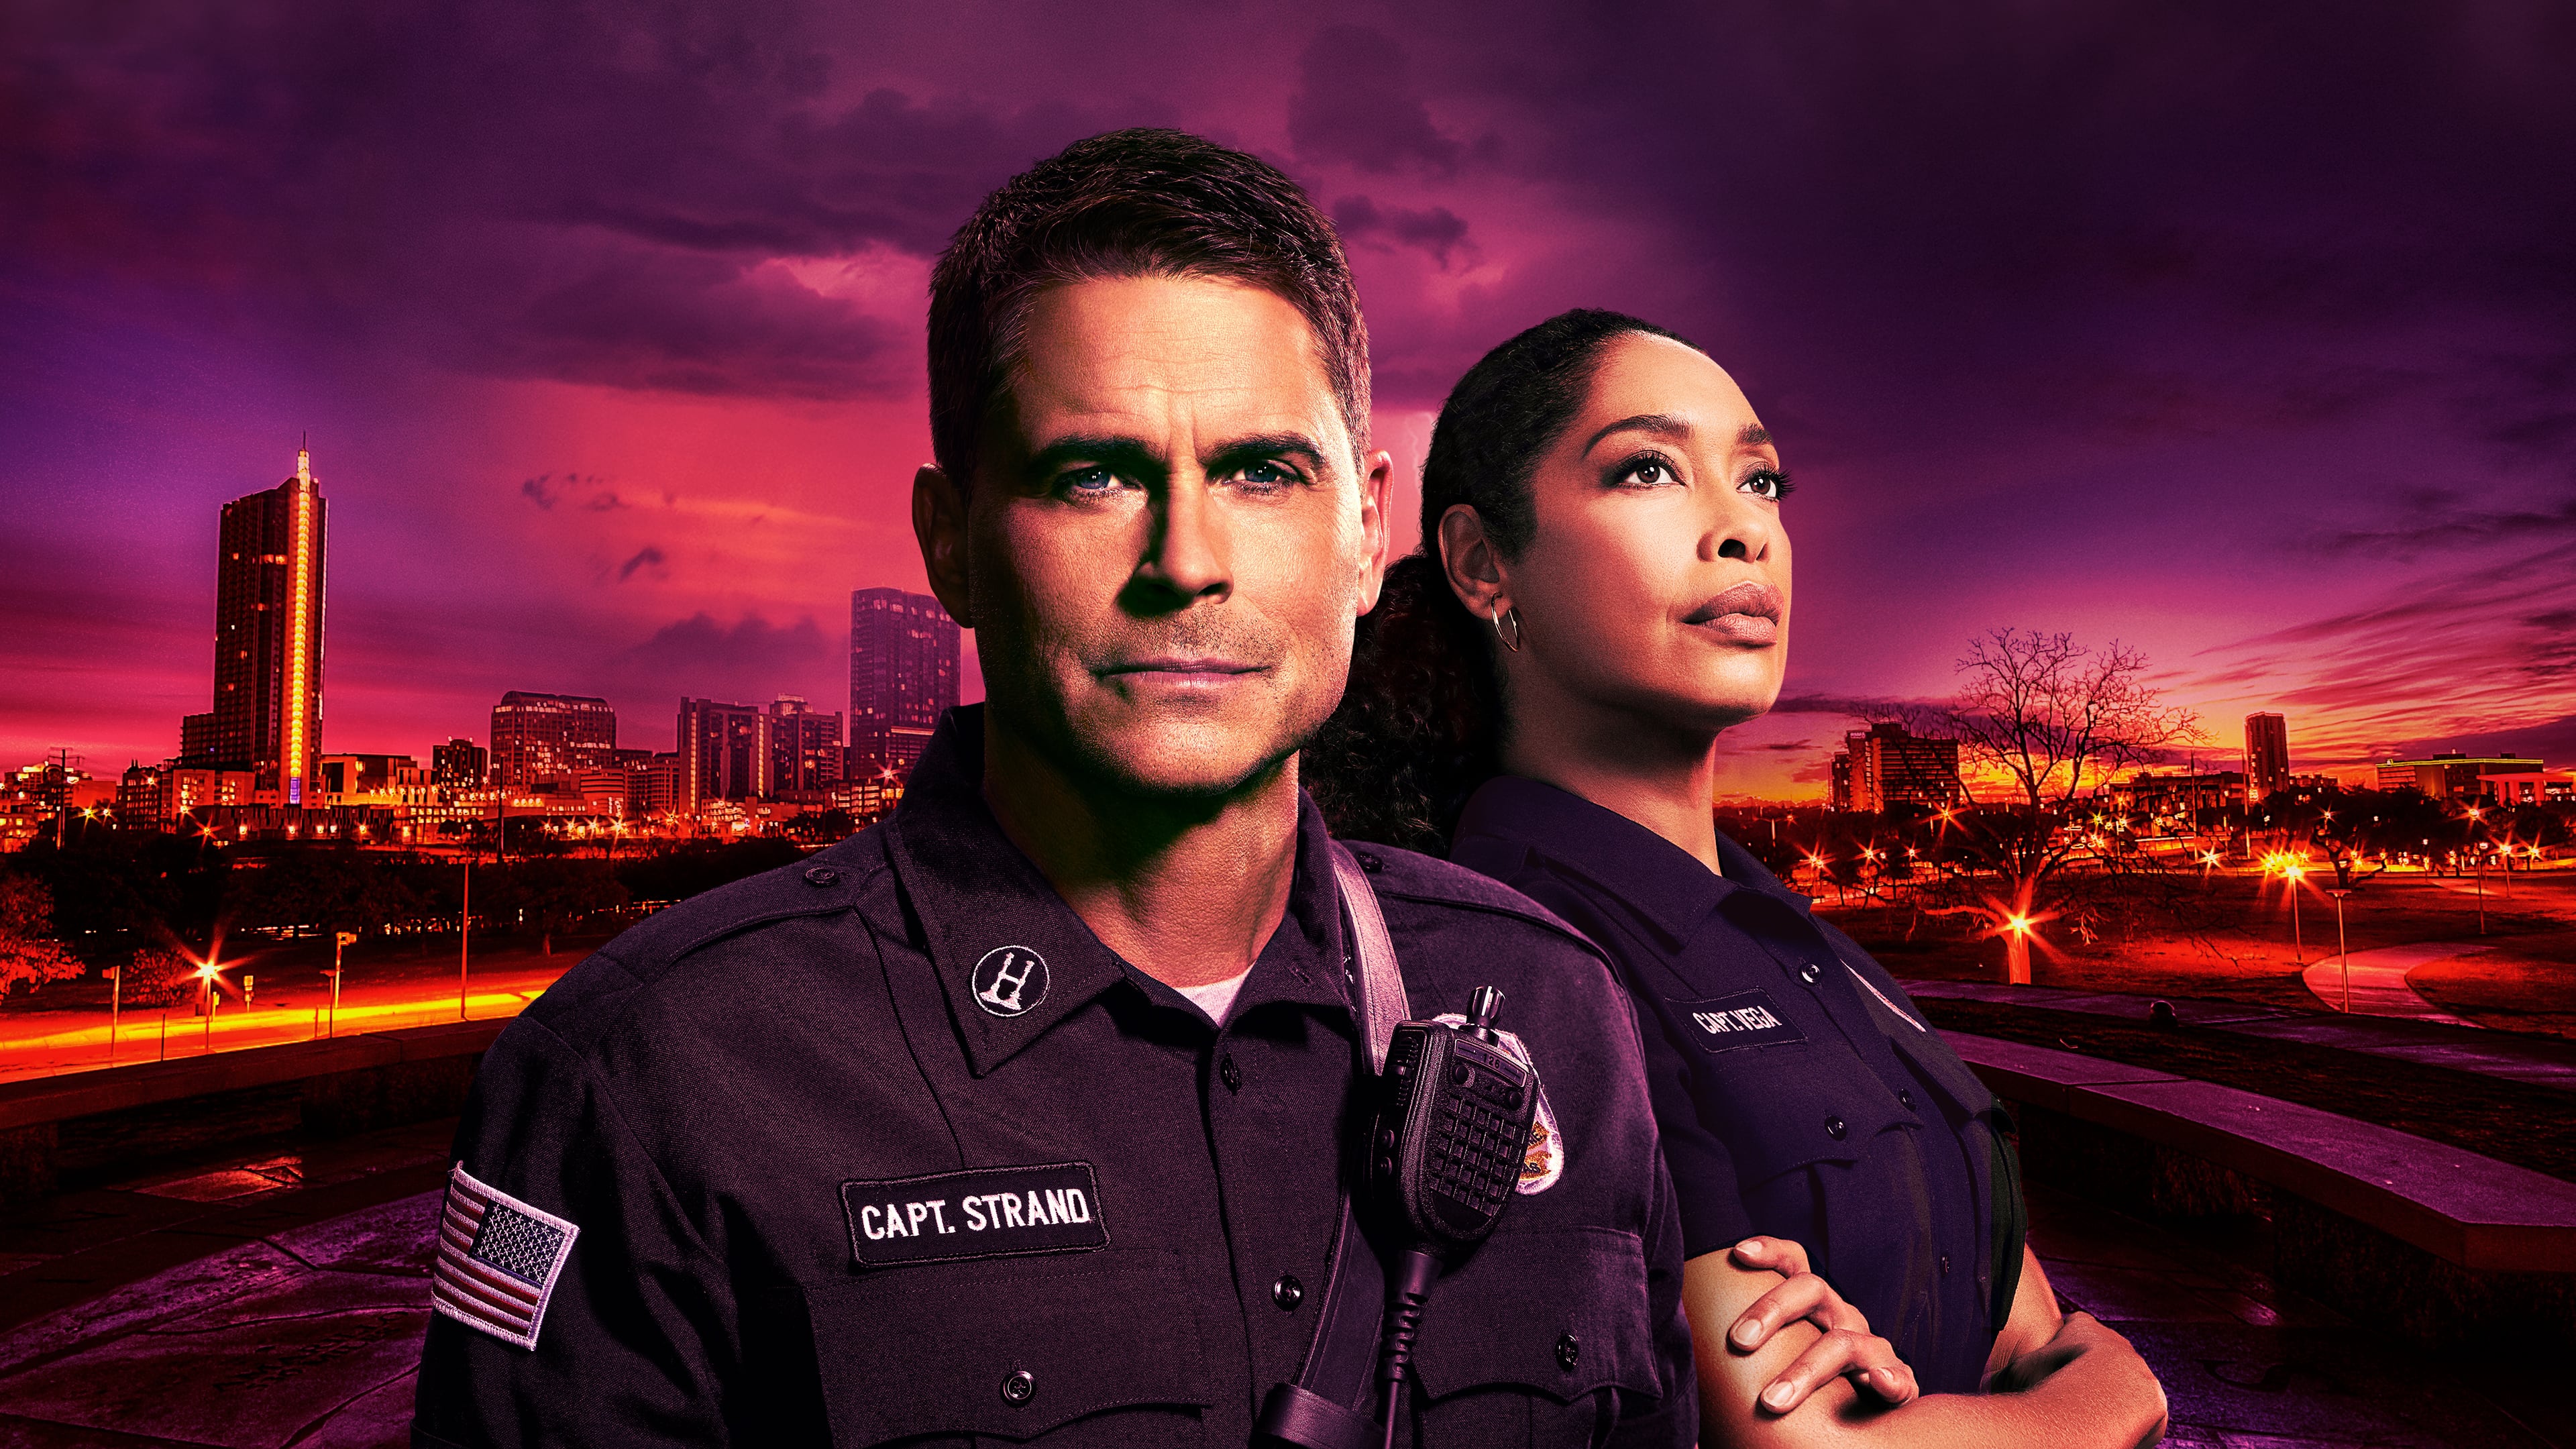 9-1-1 Lone Star Season 3 - Current Updates on Release Date, Cast, Plot, and More!